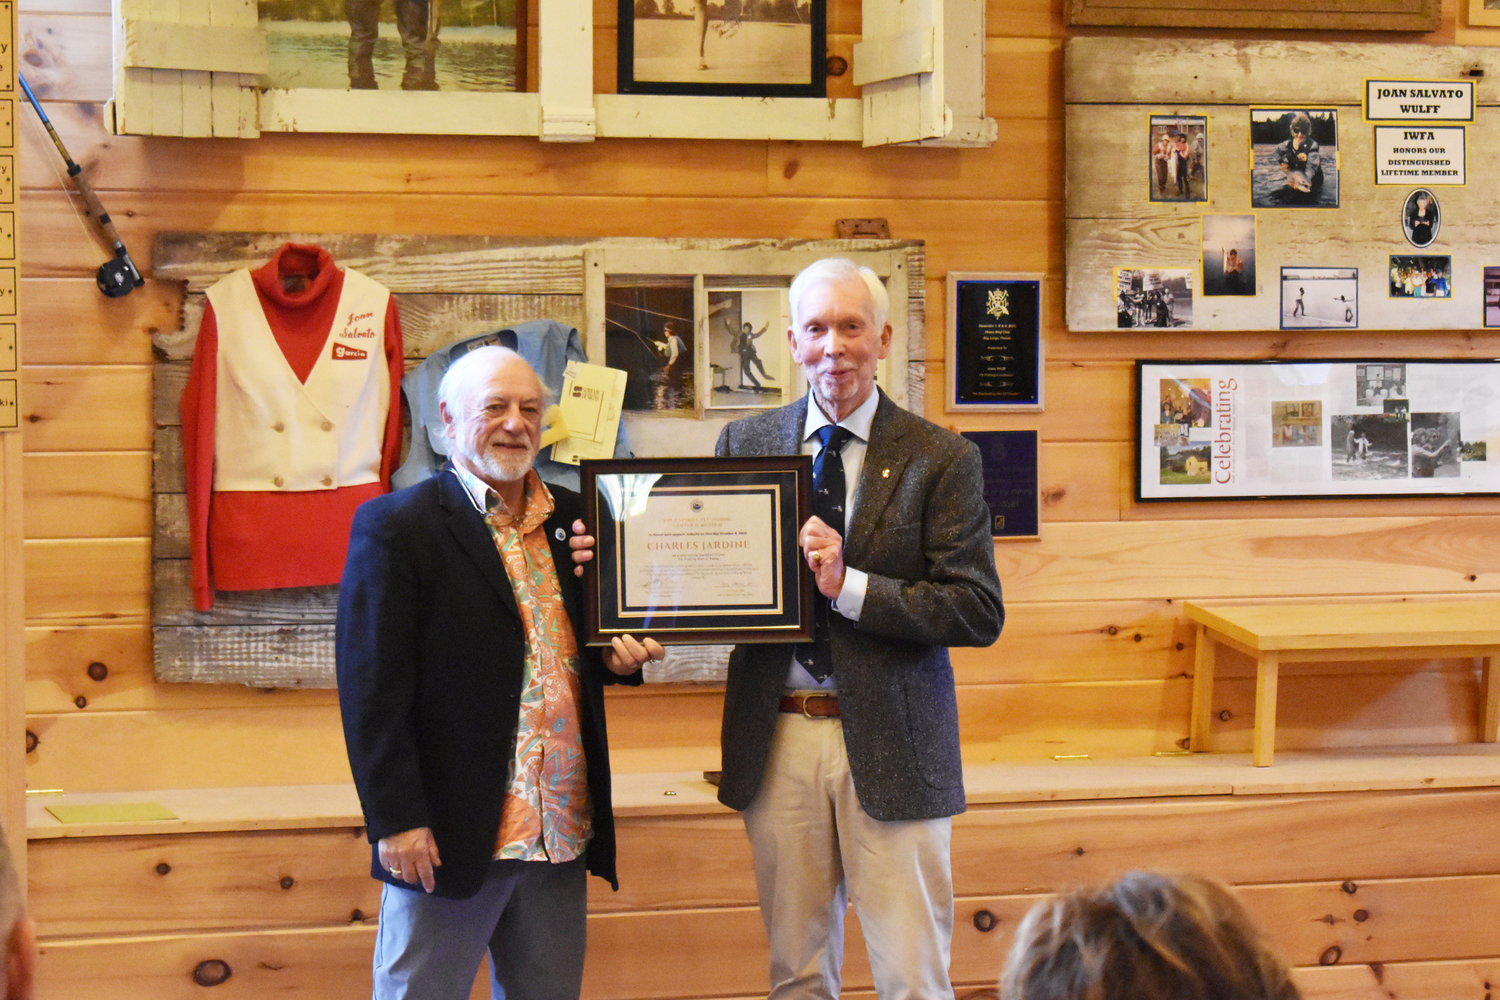 Charles Jardine (right) accepts his framed Hall of Fame induction award certificate from Ted Patlan, part of the Hall of Fame Committee Chair.